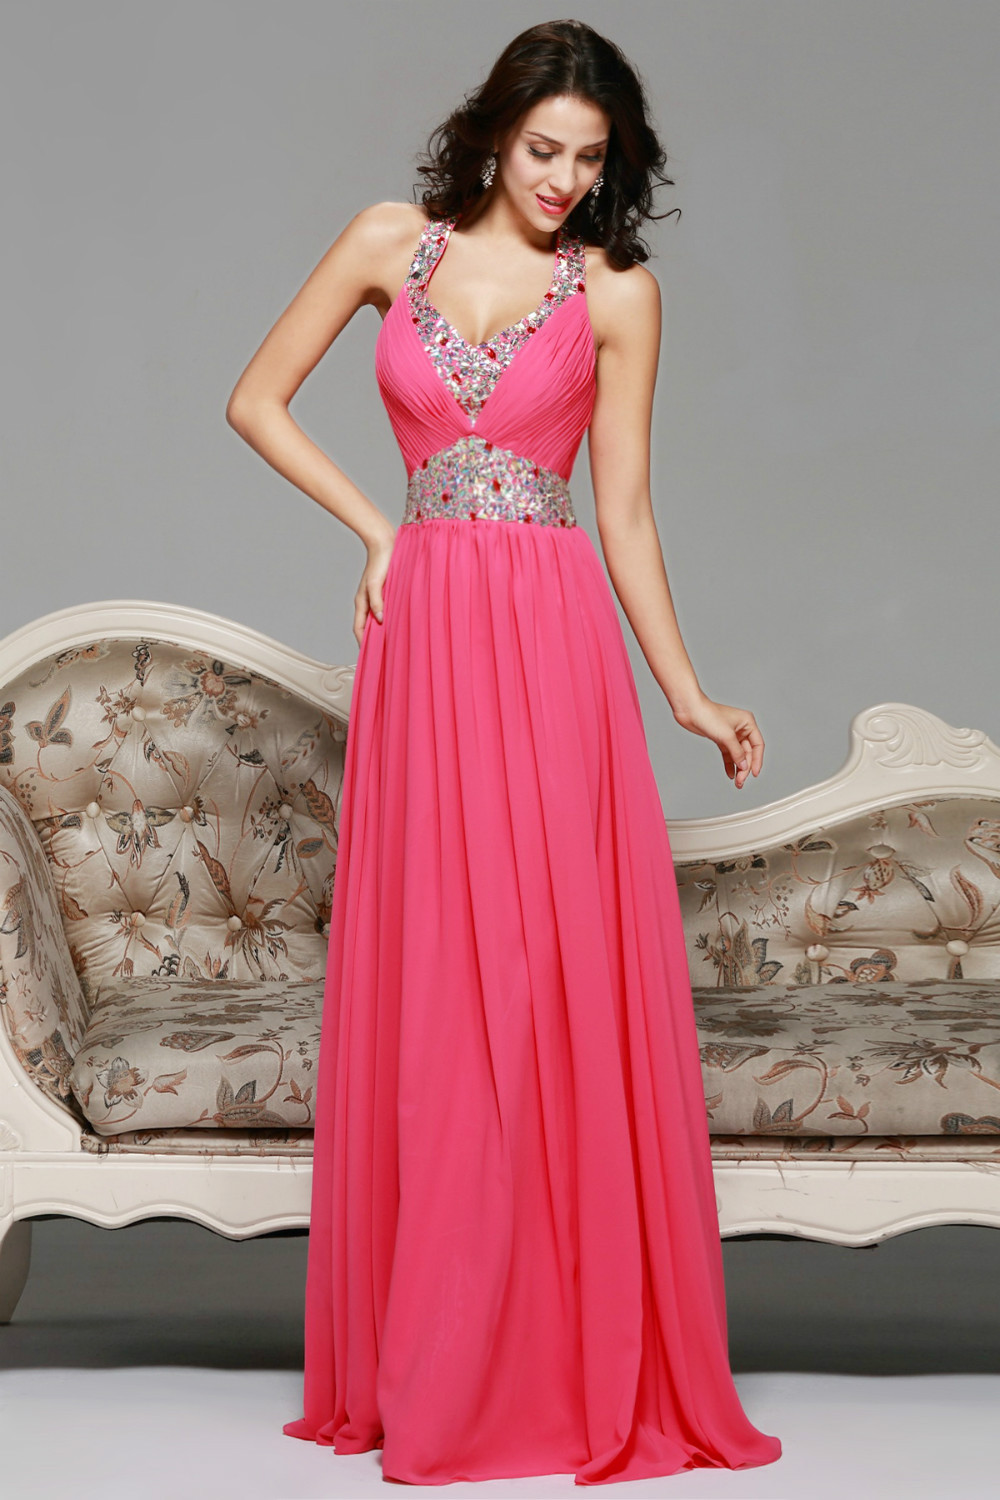 party frocks for women